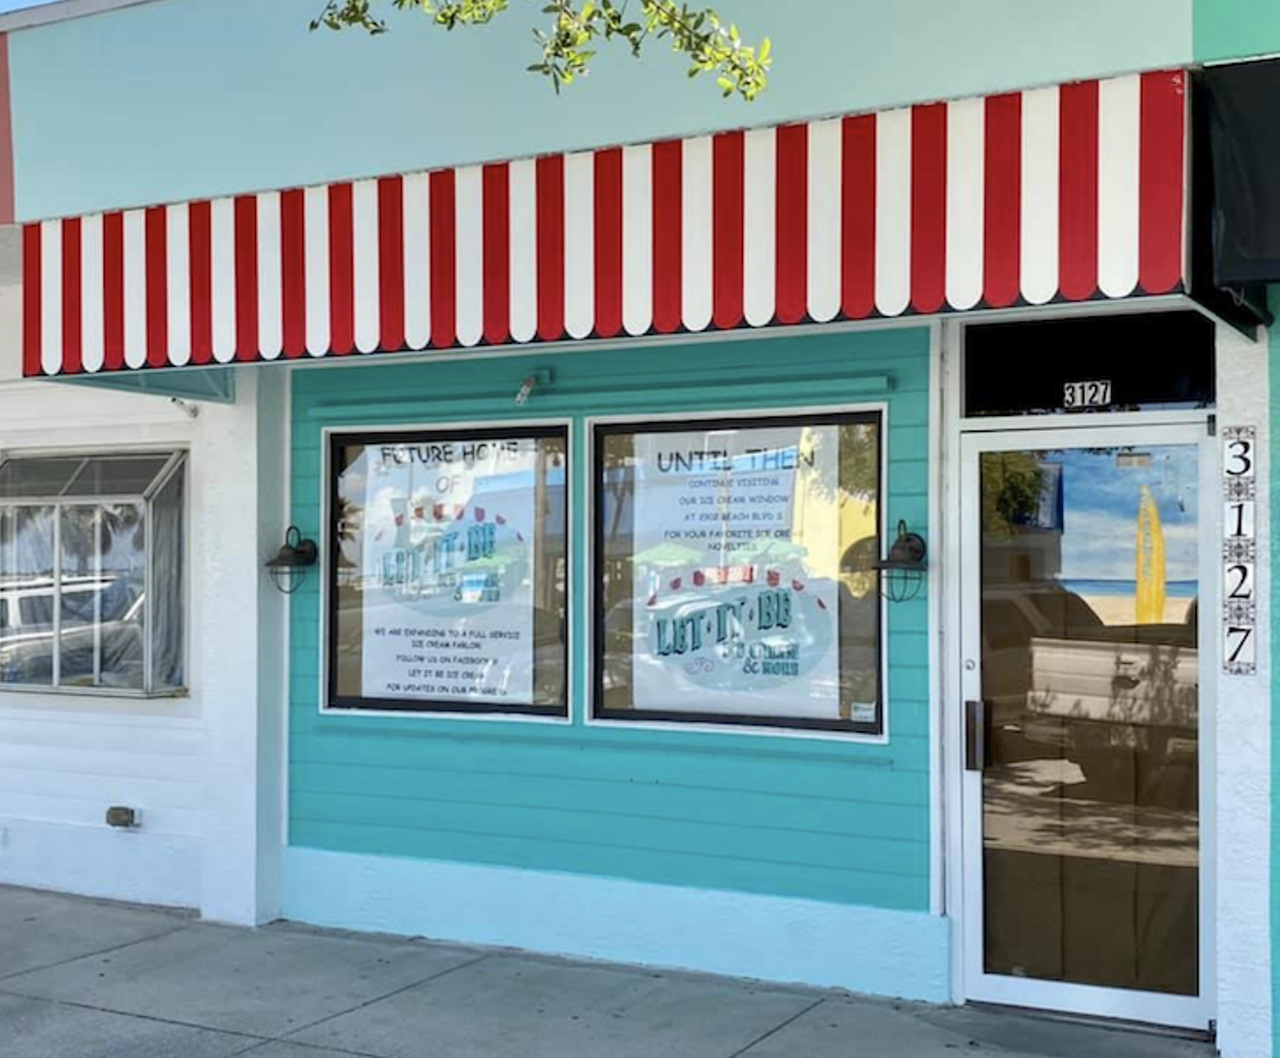 Let It Be Ice Cream  
3127 Beach Blvd S, Gulfport, (727) 543-4949
Let It Be Ice Cream is owned and operated by Janet Impastato and Tina Grello. The once walk-up window, now is a full-service ice cream shop with too many flavors to name. 
Photo via Let It Be Ice Cream/Facebook